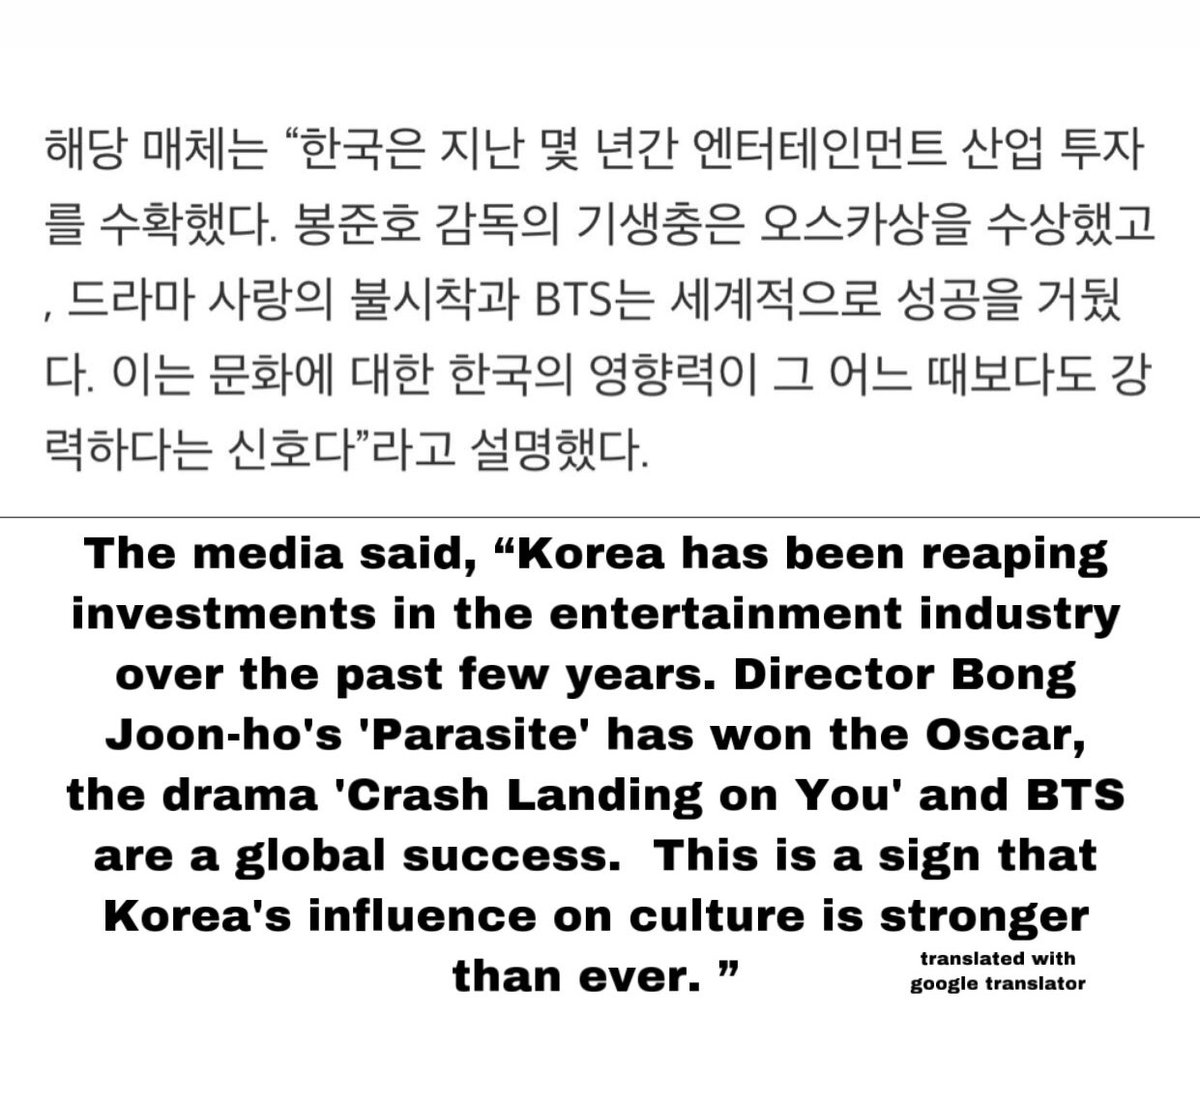 cloy is mentioned alongside bts and bong joonho for their global success and is the latest example of hallyu (korean wave) success